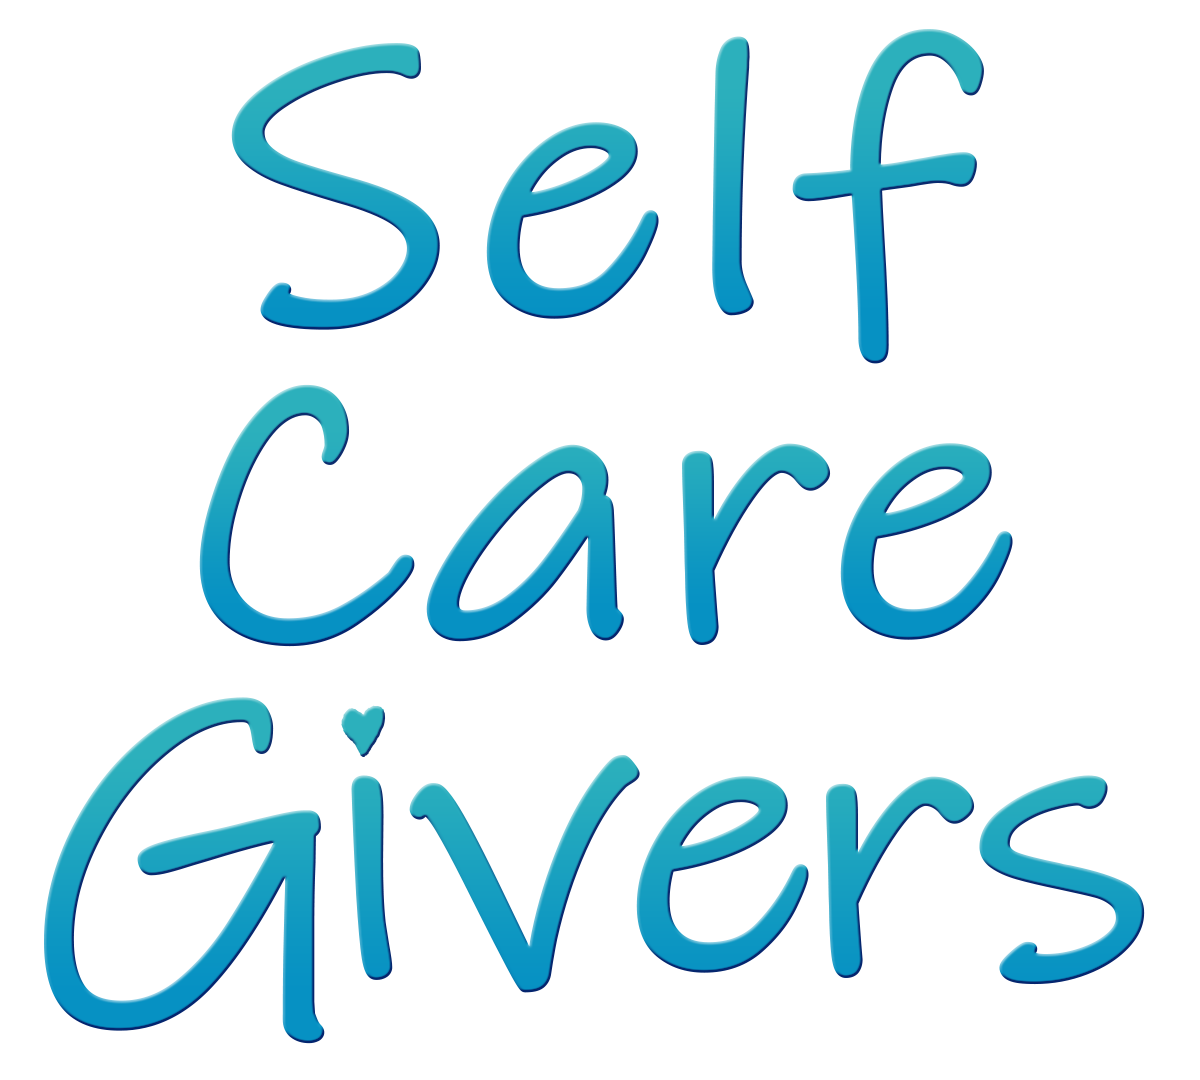 Self Care Givers